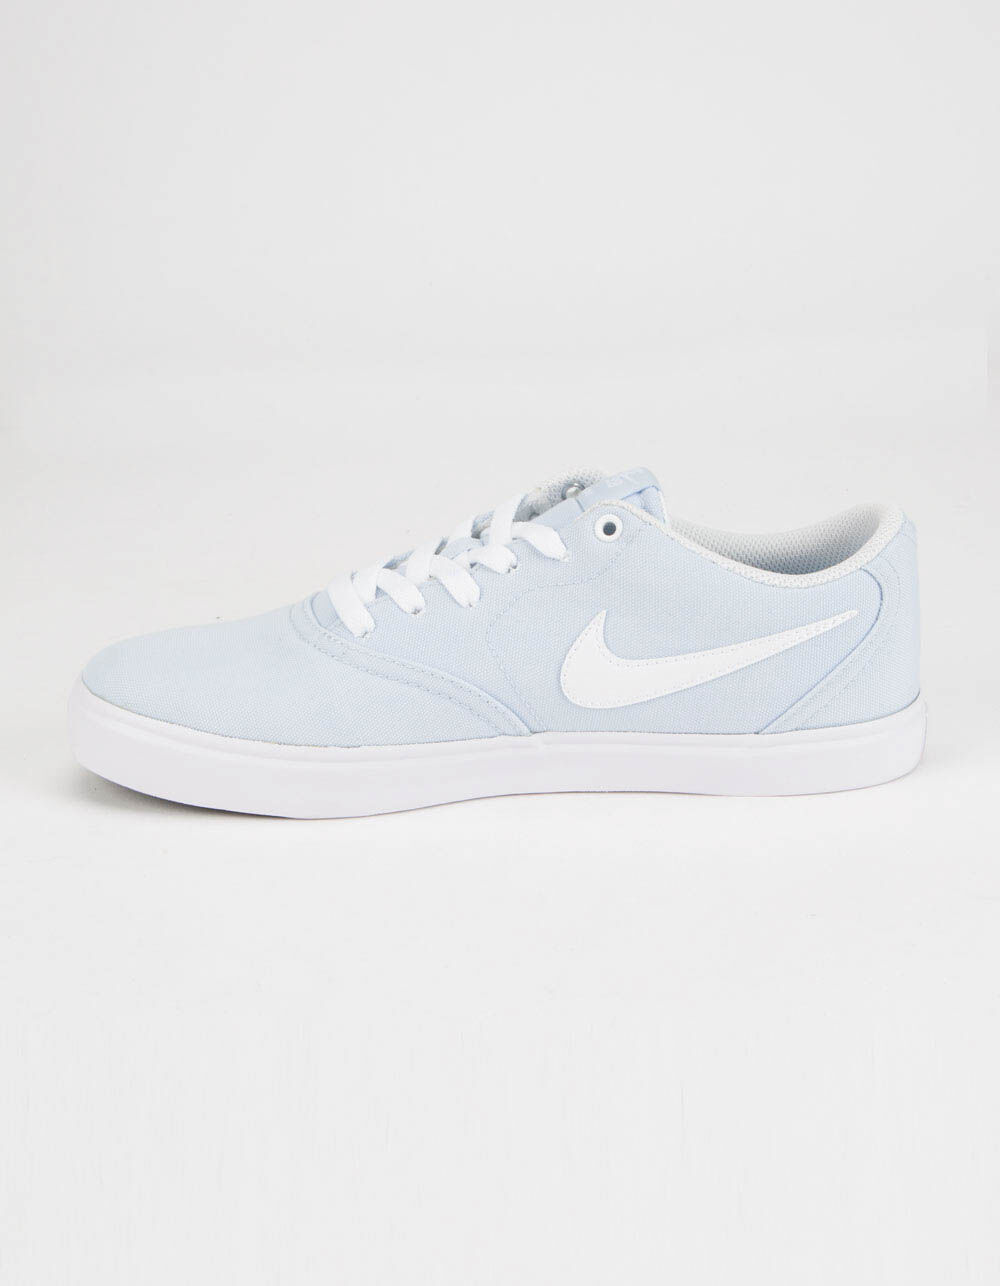 NIKE SB Check Canvas Baby Blue Womens Shoes - BABY BLUE | Tillys